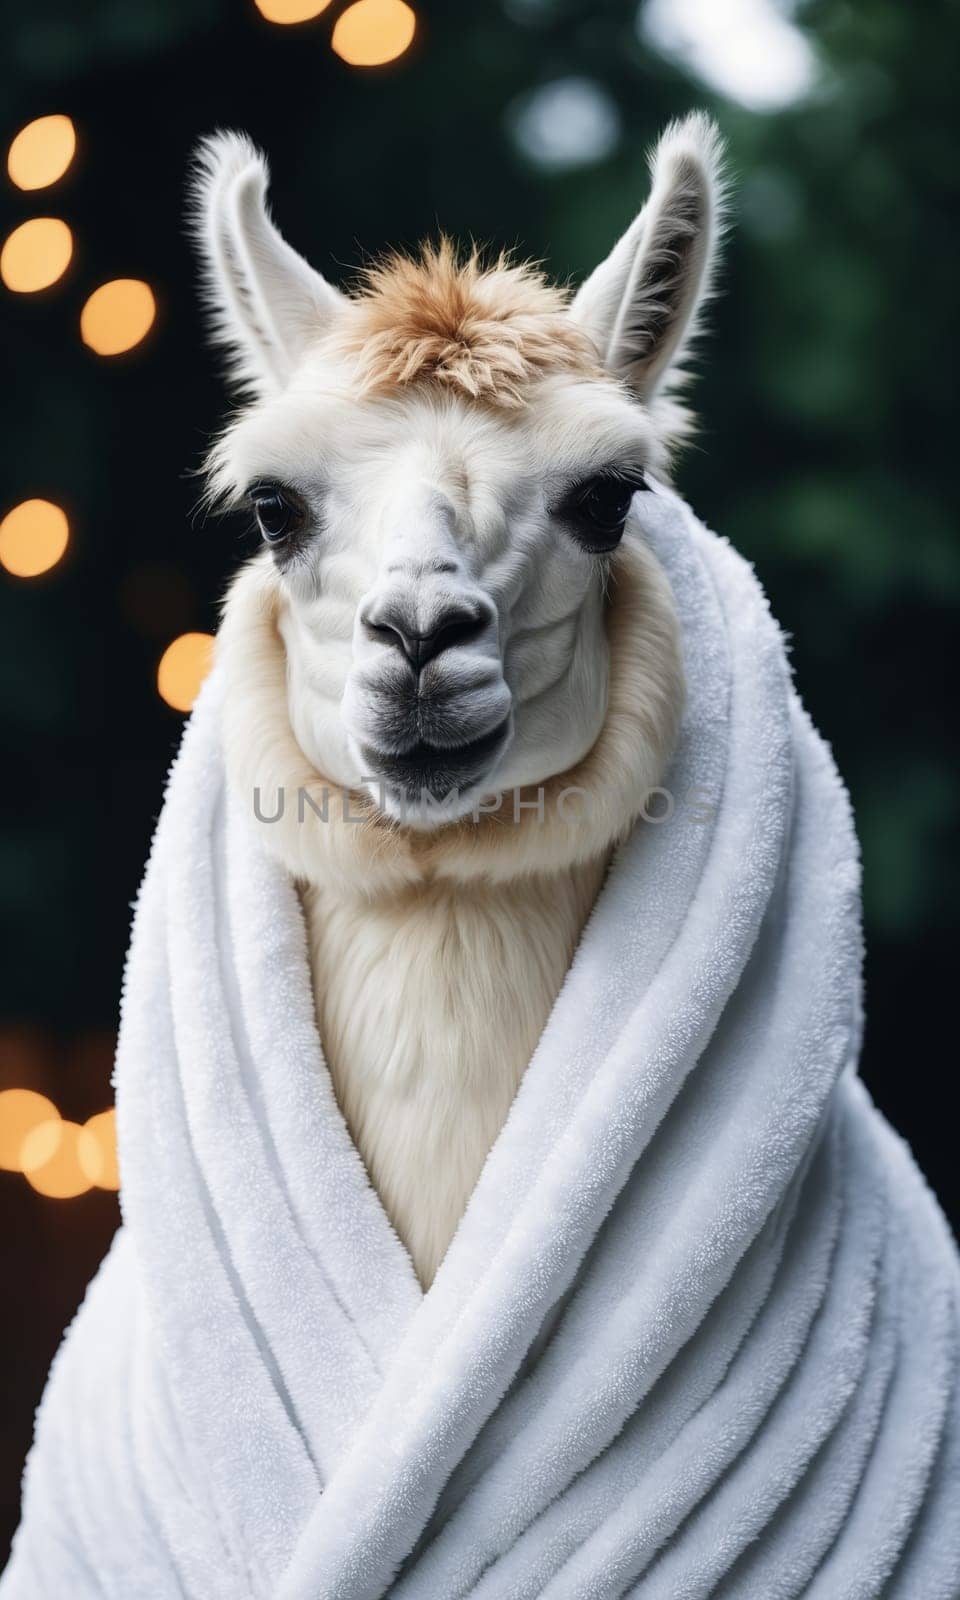 Portrait of a white alpaca wearing a white bathrobe in the mountains by Andre1ns